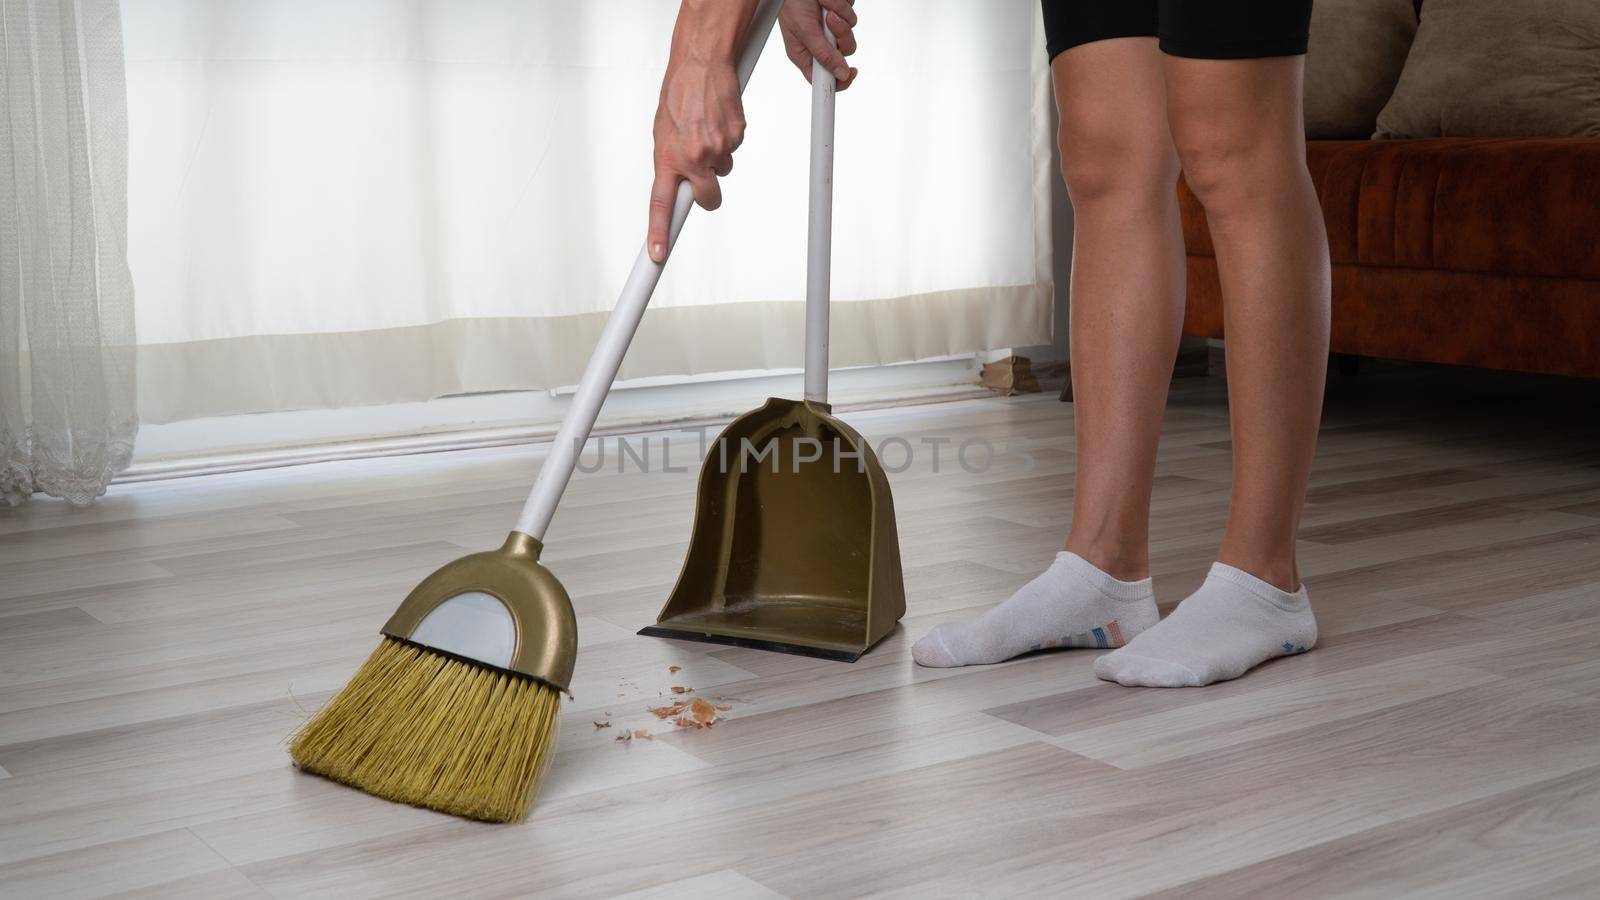 The housewife does the cleaning in the apartment sweeps the dirt off the floor with a broom brush into the scoop. High quality photo